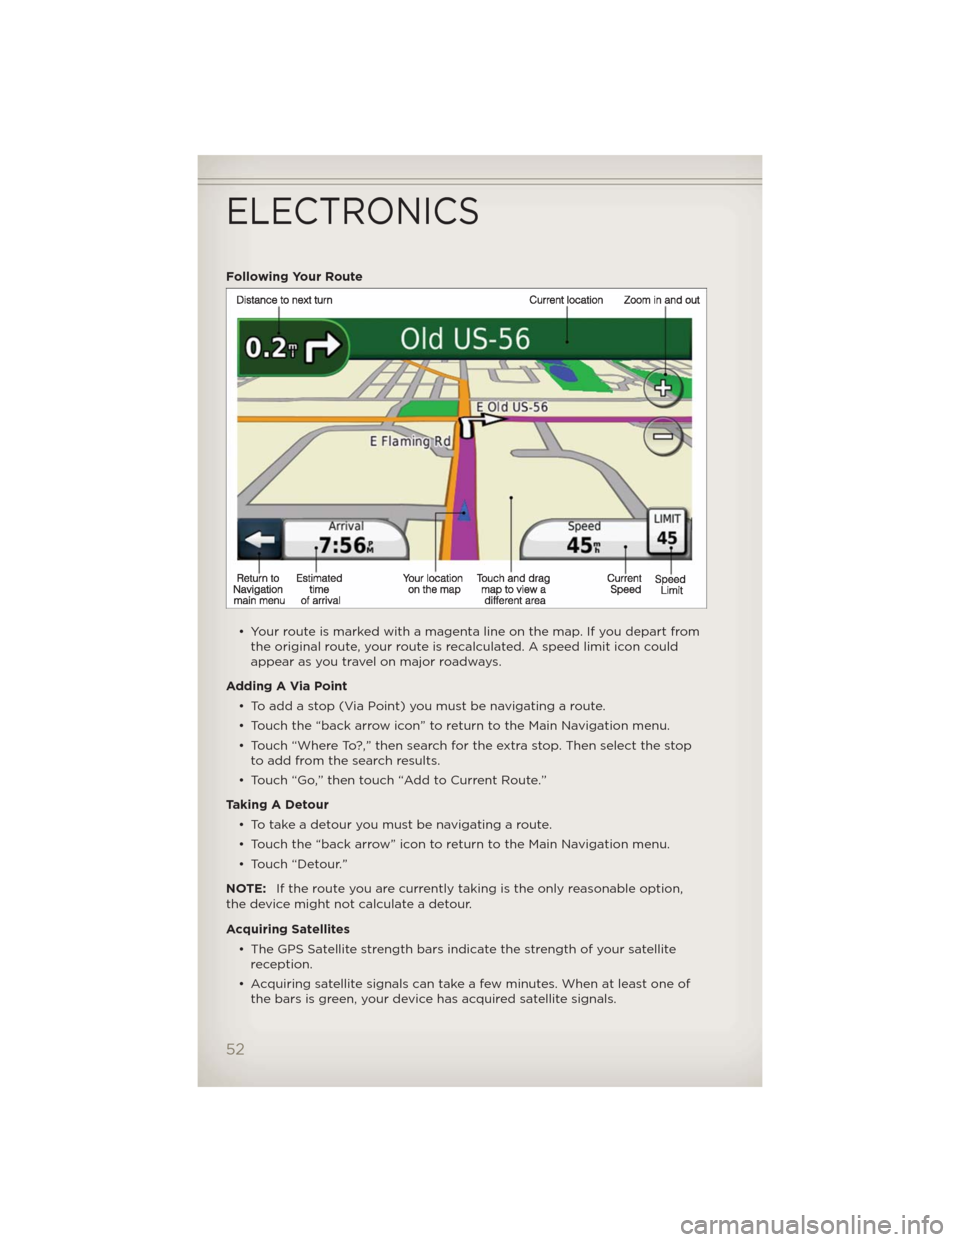 JEEP WRANGLER 2012 JK / 3.G User Guide Following Your Route
• Your route is marked with a magenta line on the map. If you depart from
the original route, your route is recalculated. A speed limit icon could
appear as you travel on major 